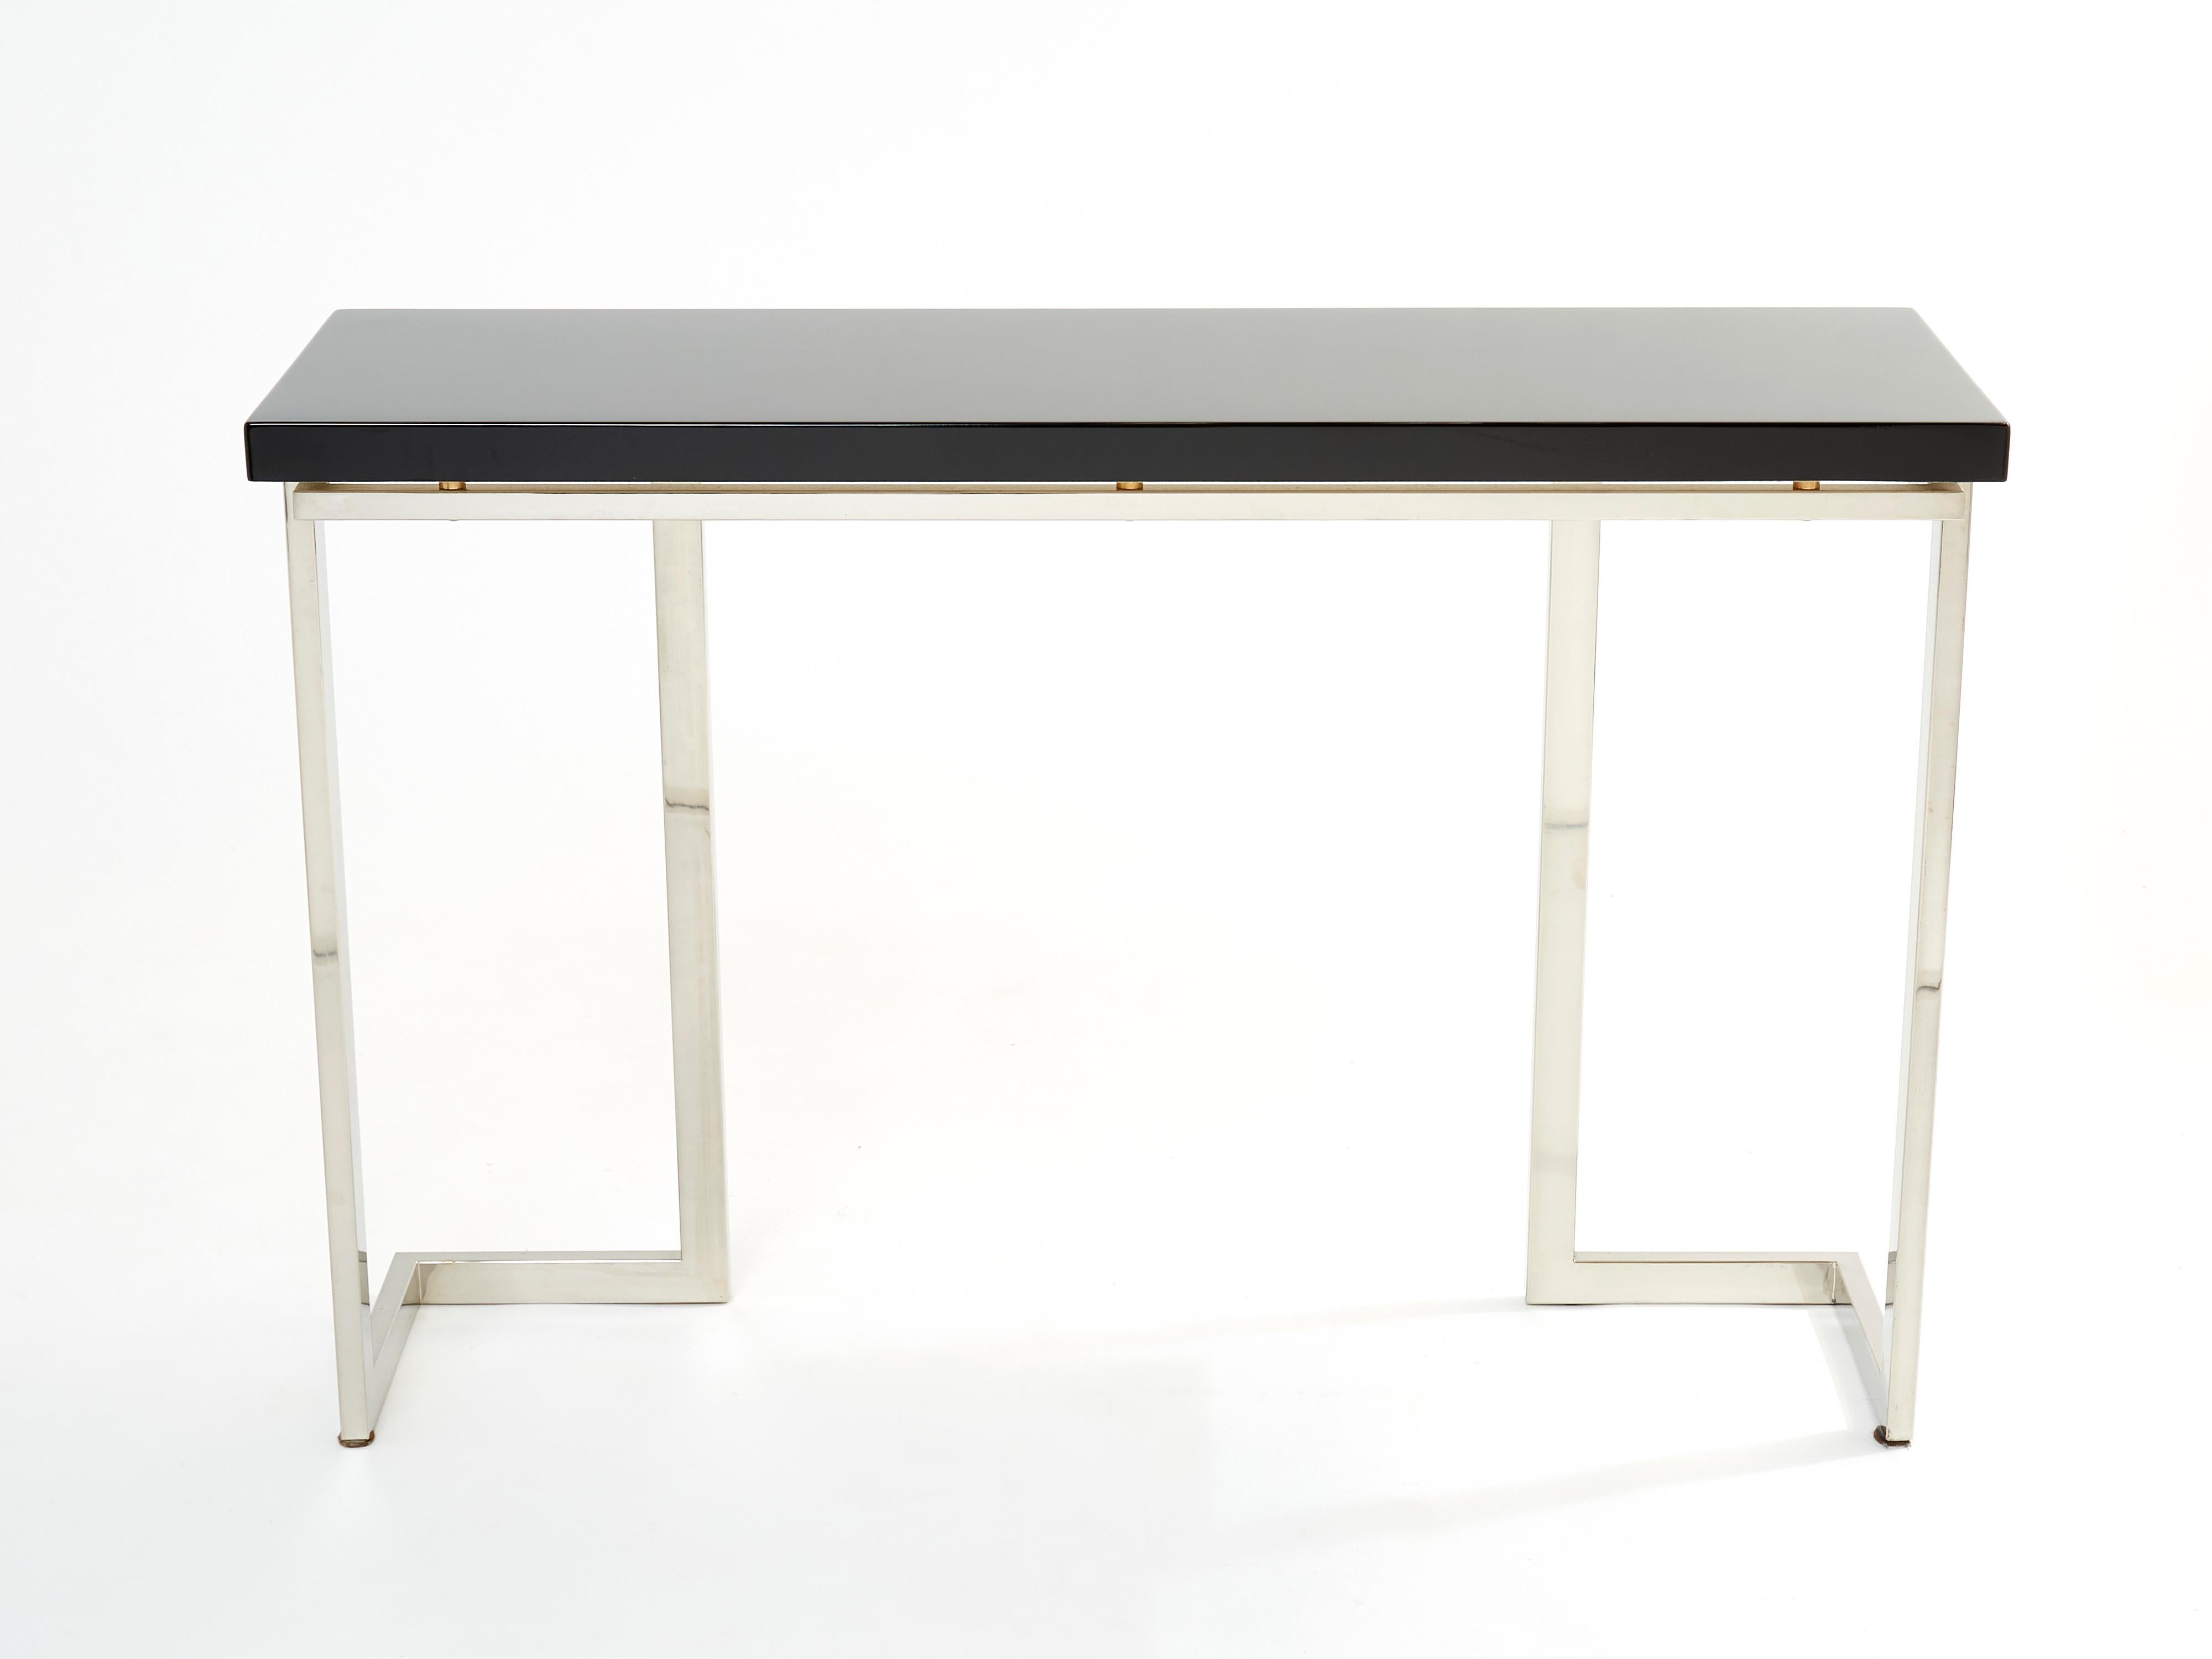 With a shining black lacquered top, and sharply geometric chrome legs and structure,, this console table carries a futuristic mid-century aesthetic into the contemporary home. Its boxy yet sophisticated style is typical of both the 1970s and French